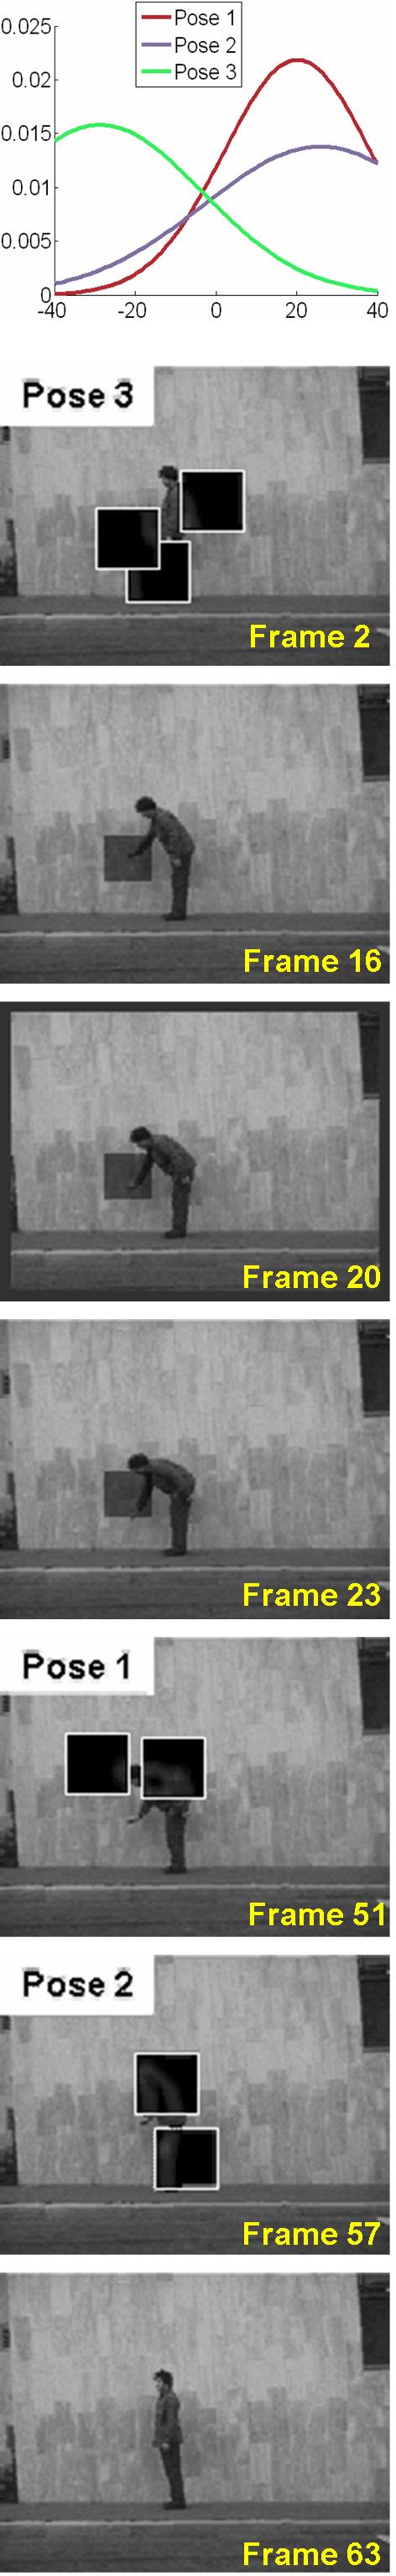 Grayed rectangles represent 2D central slice of the landmark spatio-temporal subregion in corresponding frames.